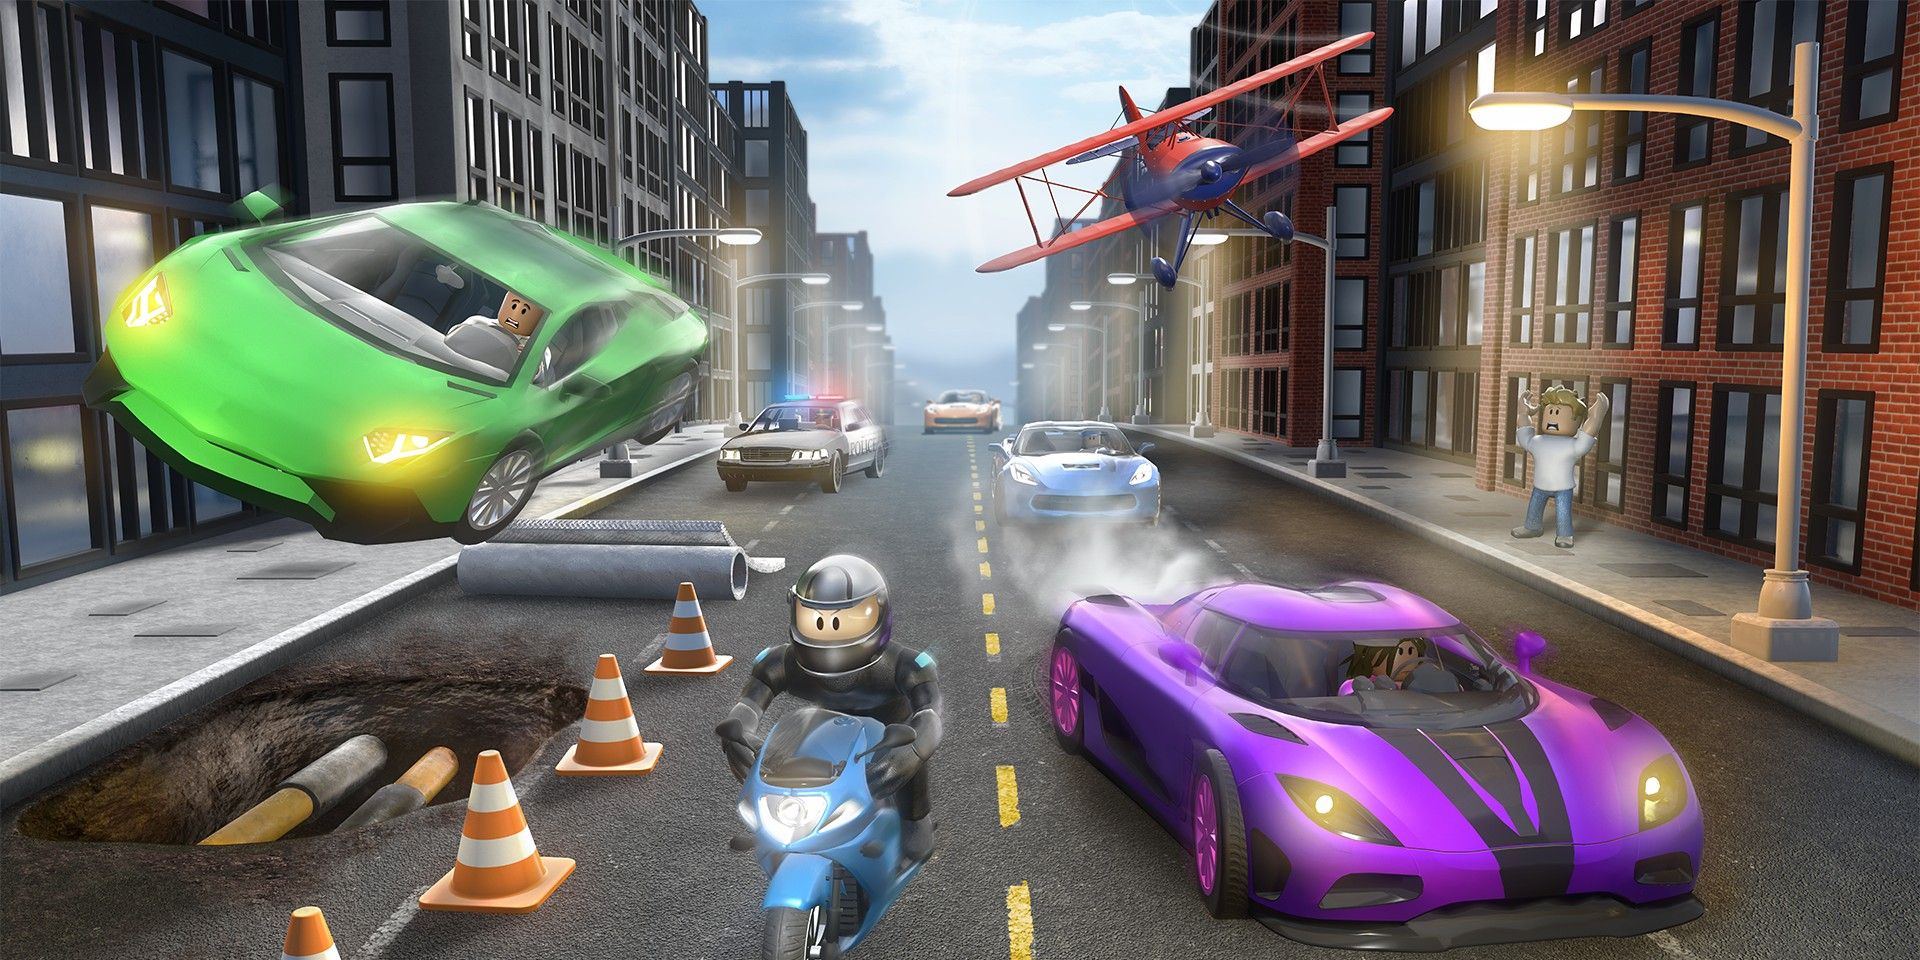 Roblox Is Holding A Virtual Treasure Hunt For Ready Player Two Release - roblox vehicle simulator quest items